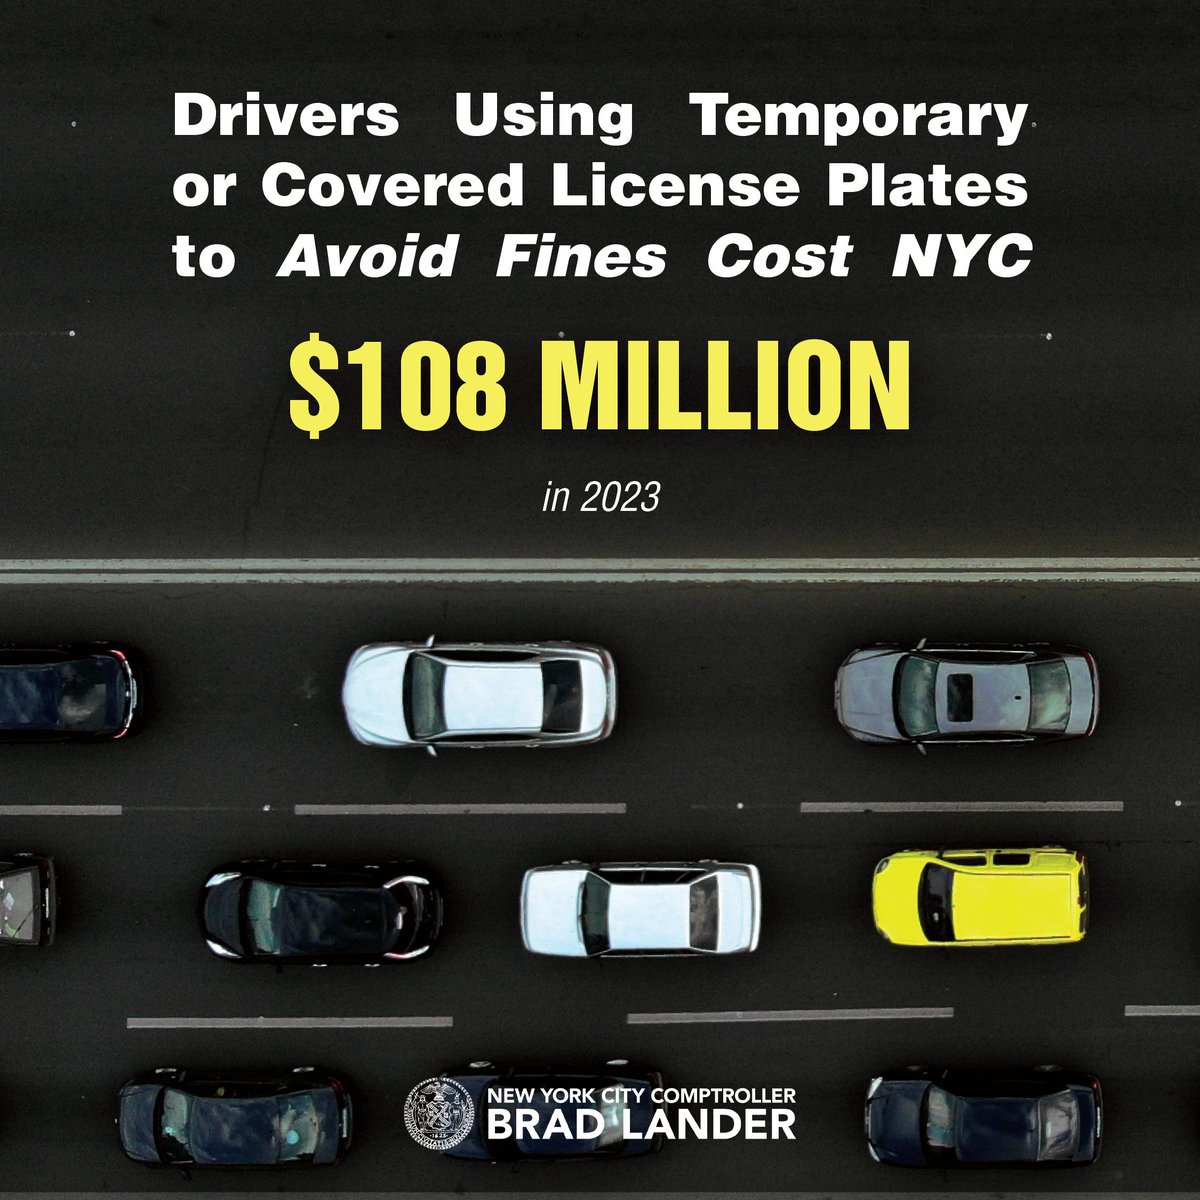 Our latest audit found a massive increase in the number of drivers using obscured, missing, or temporary license plates to slide past speed cameras and avoid fines. It's costing New York City a lot of money—over $100 million a year, in fact. @NYC_DOT needs better oversight.